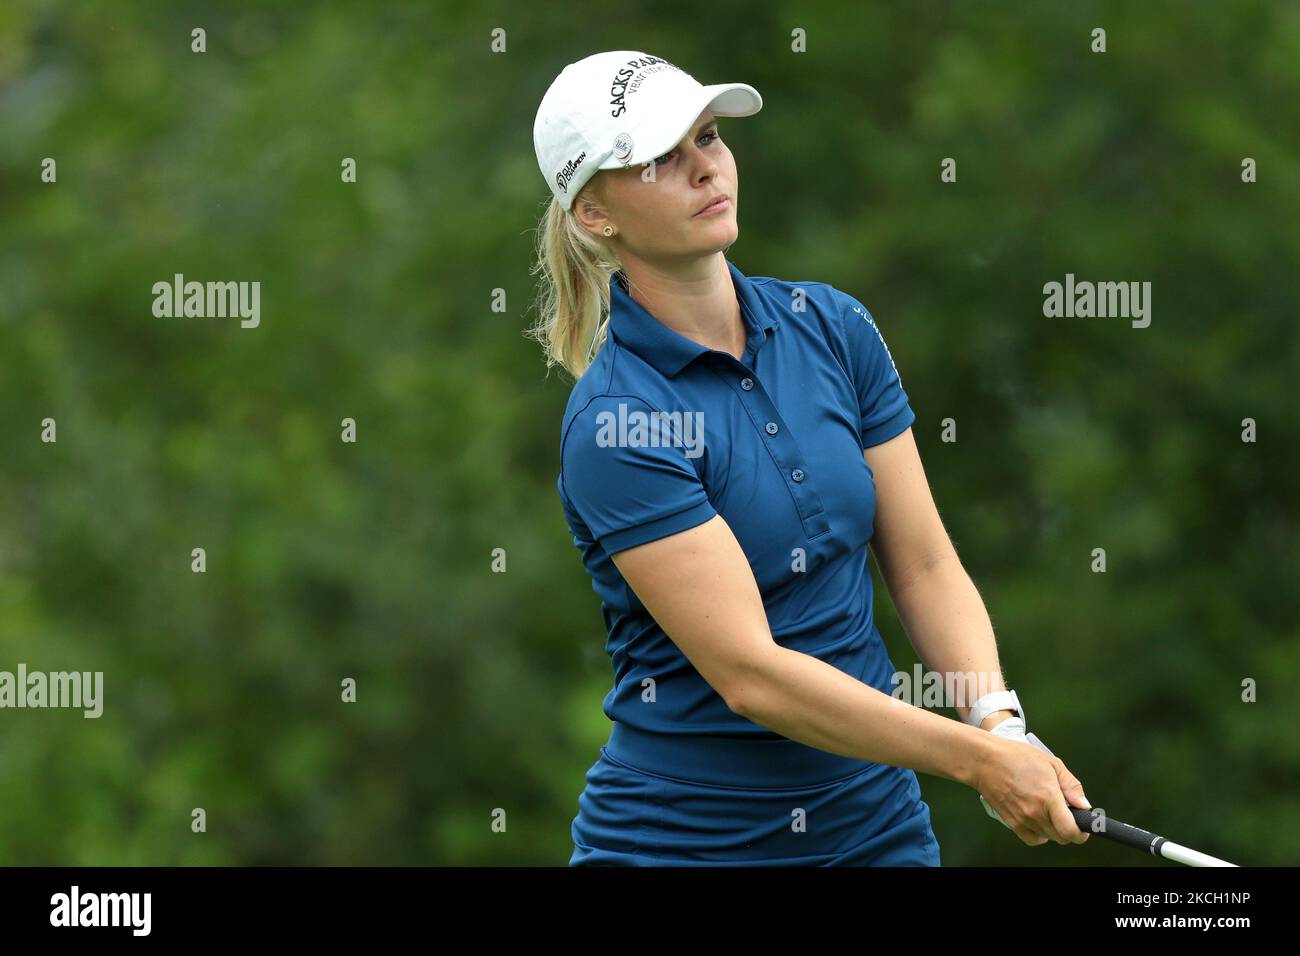 Louise Ridderstrom of Sweden follows her tee shot on the third tee during the first round of the Marathon LPGA Classic presented by Dana golf tournament at Highland Meadows Golf Club in Sylvania, Ohio USA, on Thursday, July 8, 2021. (Photo by Jorge Lemus/NurPhoto) Stock Photo